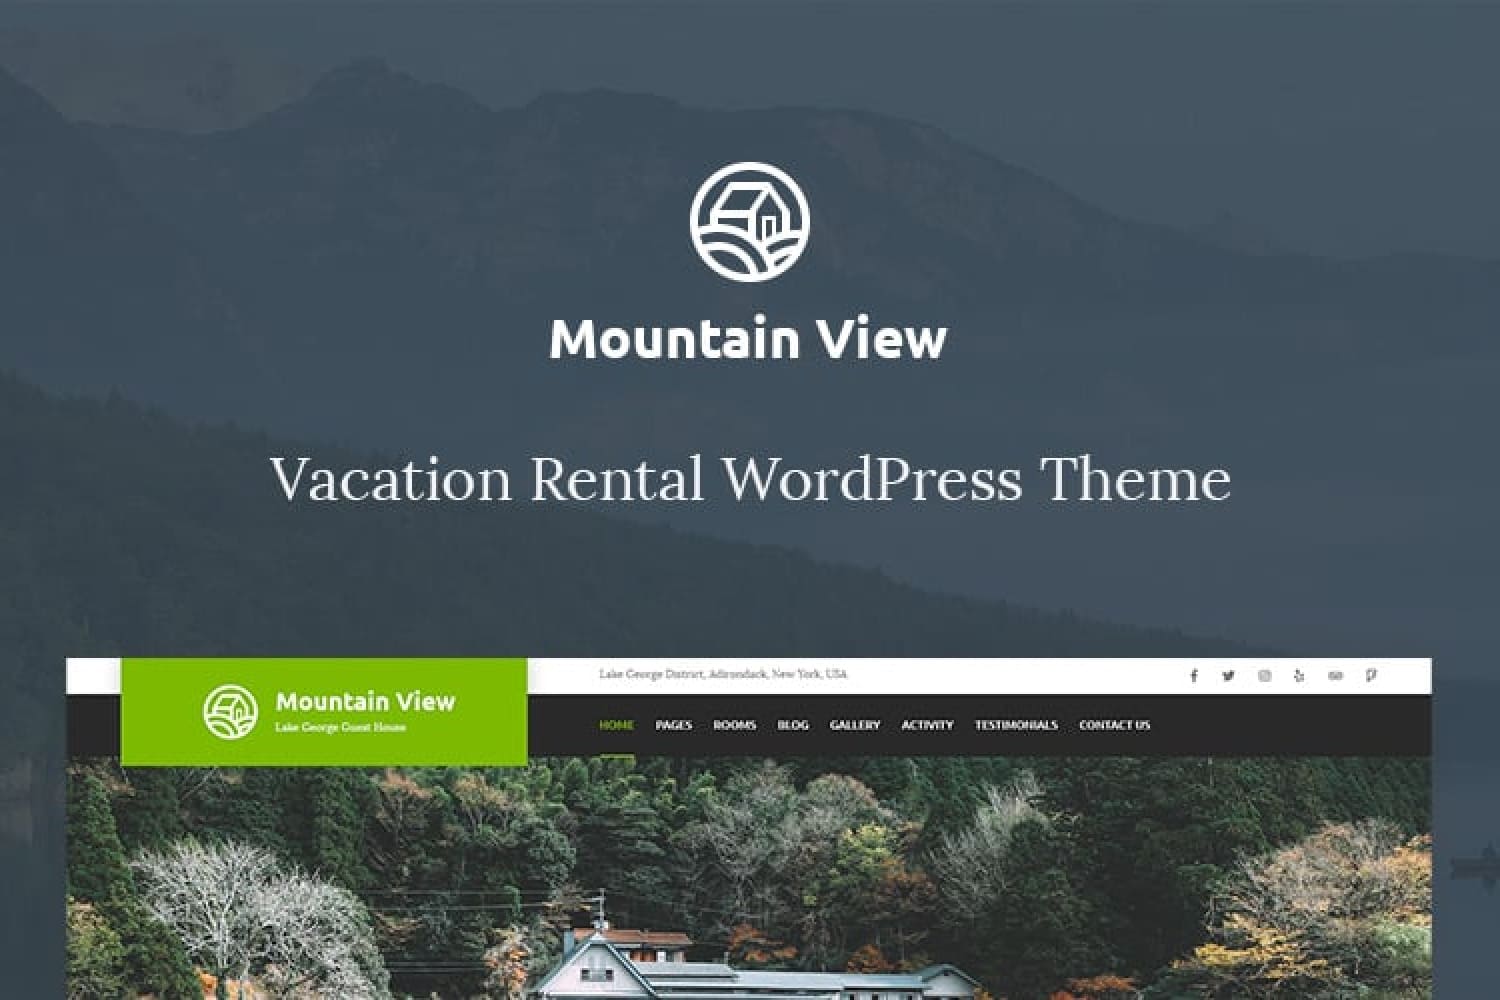 Home page of the hotel website with classic style and green accents.